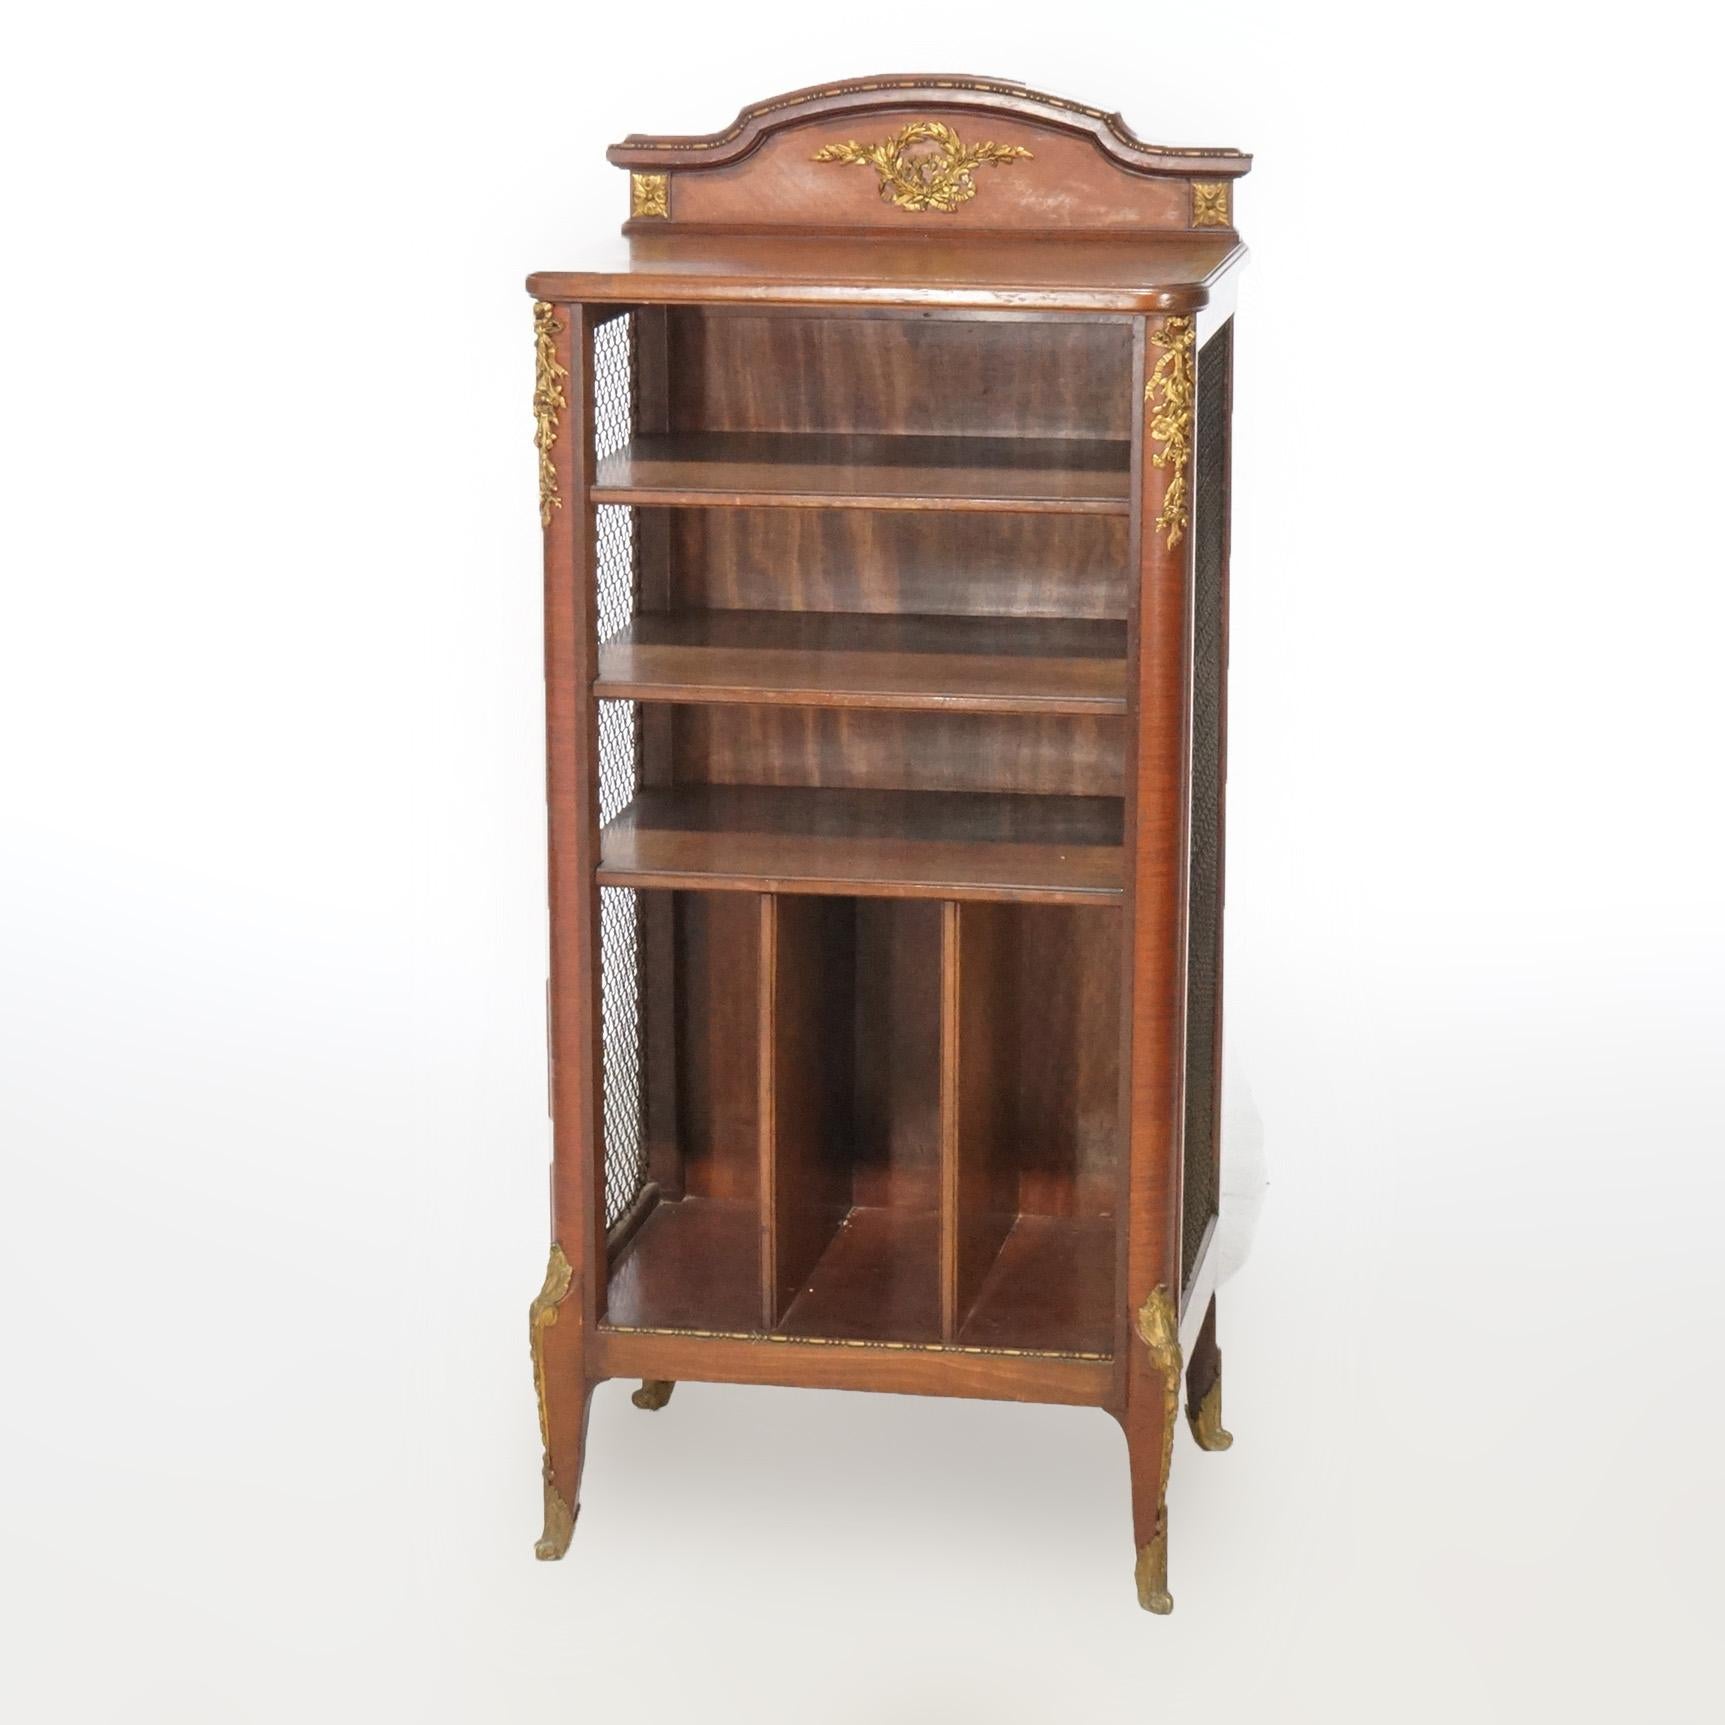 20th Century Antique French Kingwood & Satinwood Music Cabinet with Ormolu Mounts circa 1920 For Sale